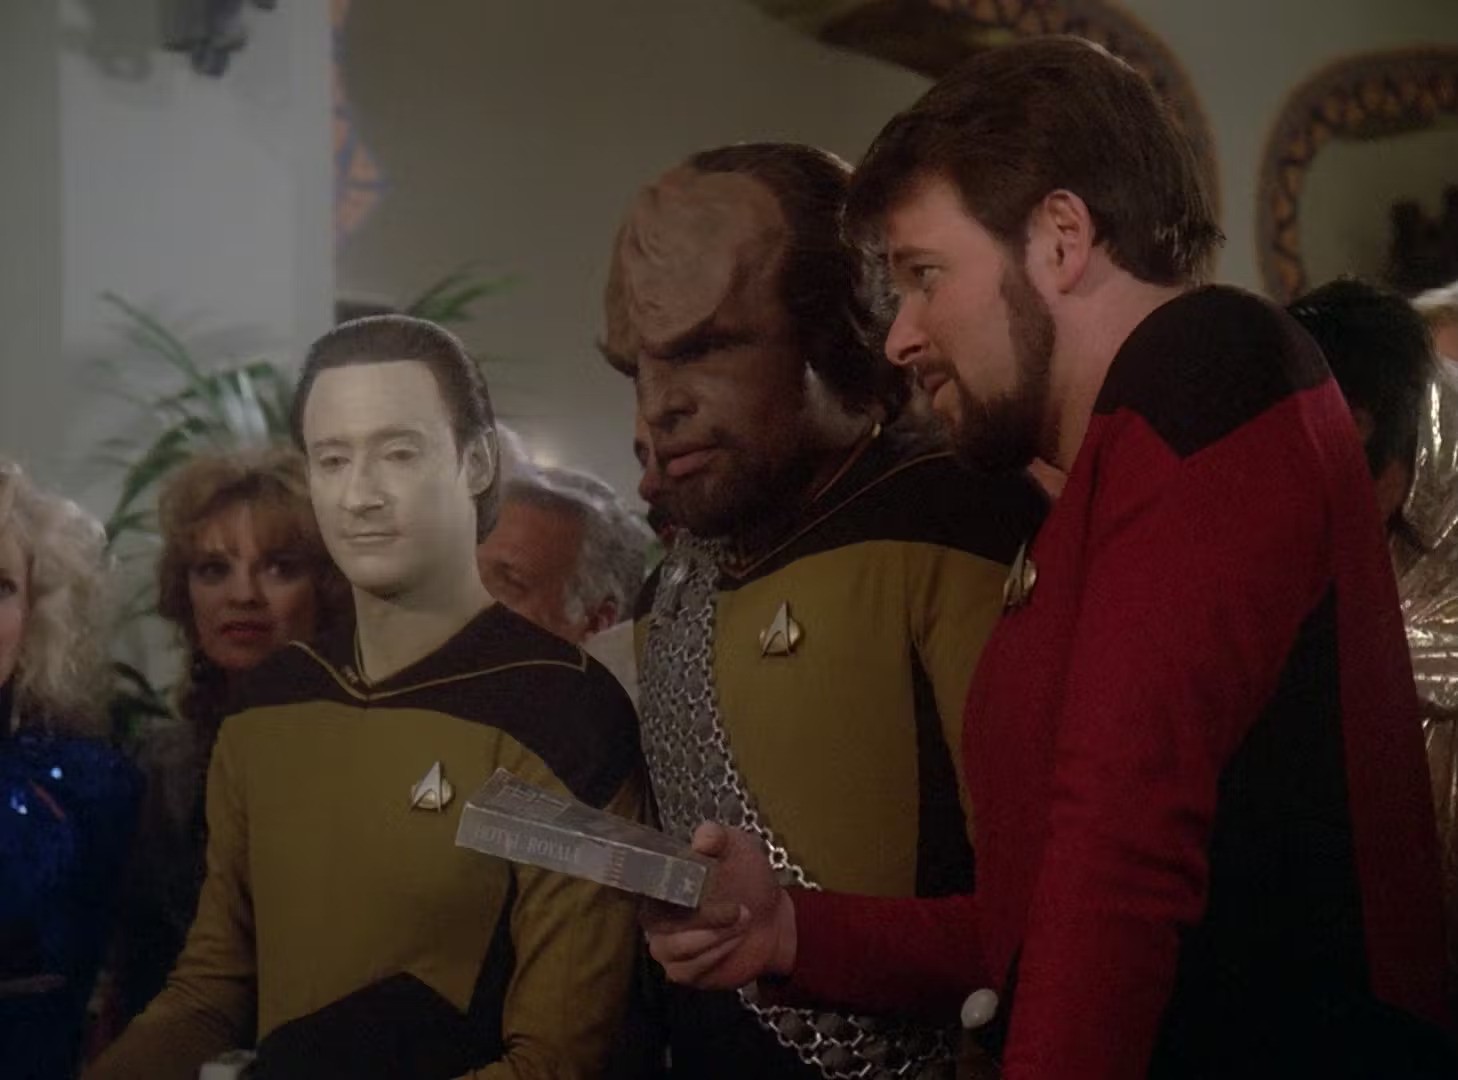 The Royale episoe from Star Trek: The Nect Generation had a comprltly different treatnent | companyParamount Domestic Television